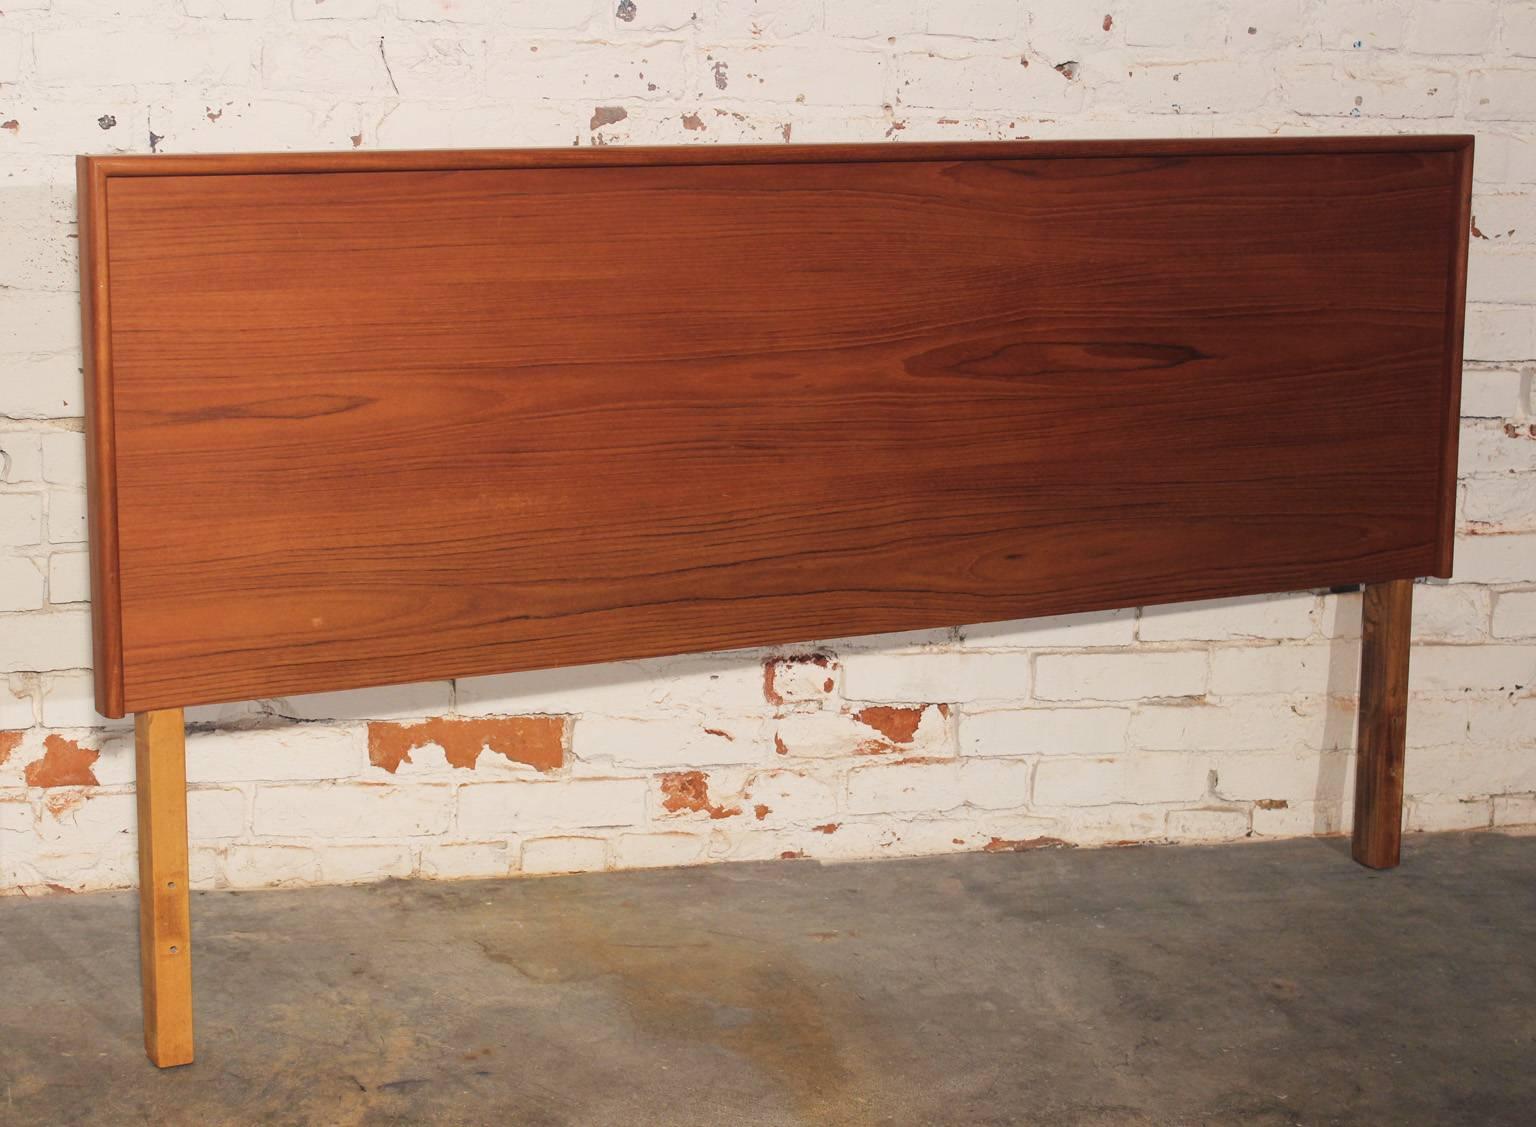 Simple but elegant Danish modern teak queen-size headboard. This vintage headboard, most likely designed during the Mid-Century Modern era, is in wonderful condition with no visible stand-out flaws.

Elegantly simple. The first two words that come